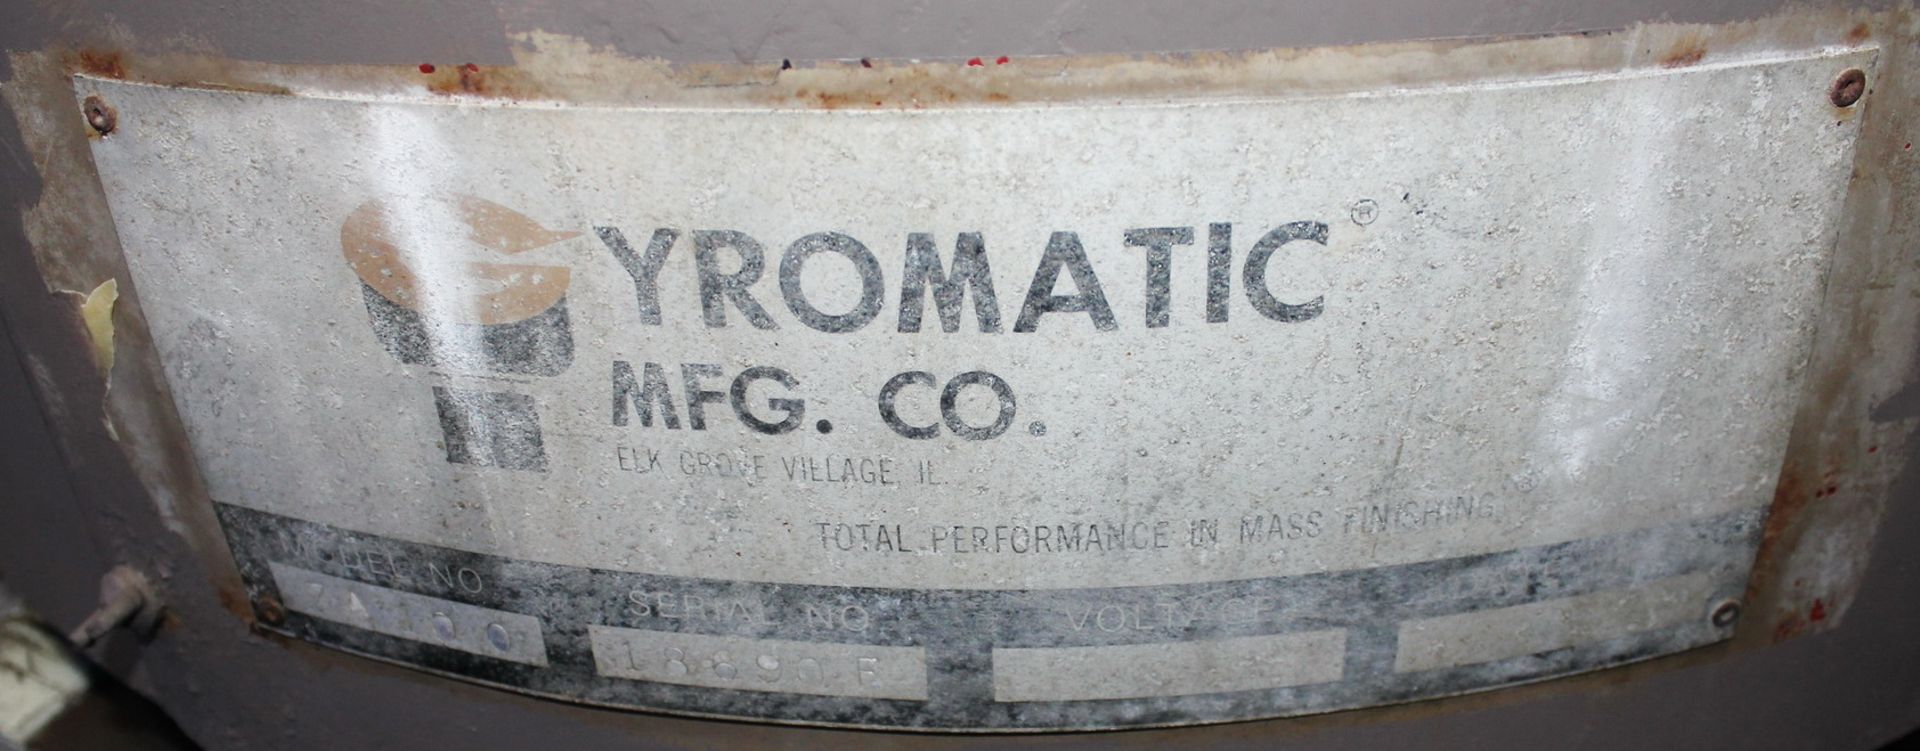 Gyromatic - Vibratory Deburring Machine (Bowl Type) | 4.5 Cubic Feet, Located In Huntington Park, CA - Image 13 of 13